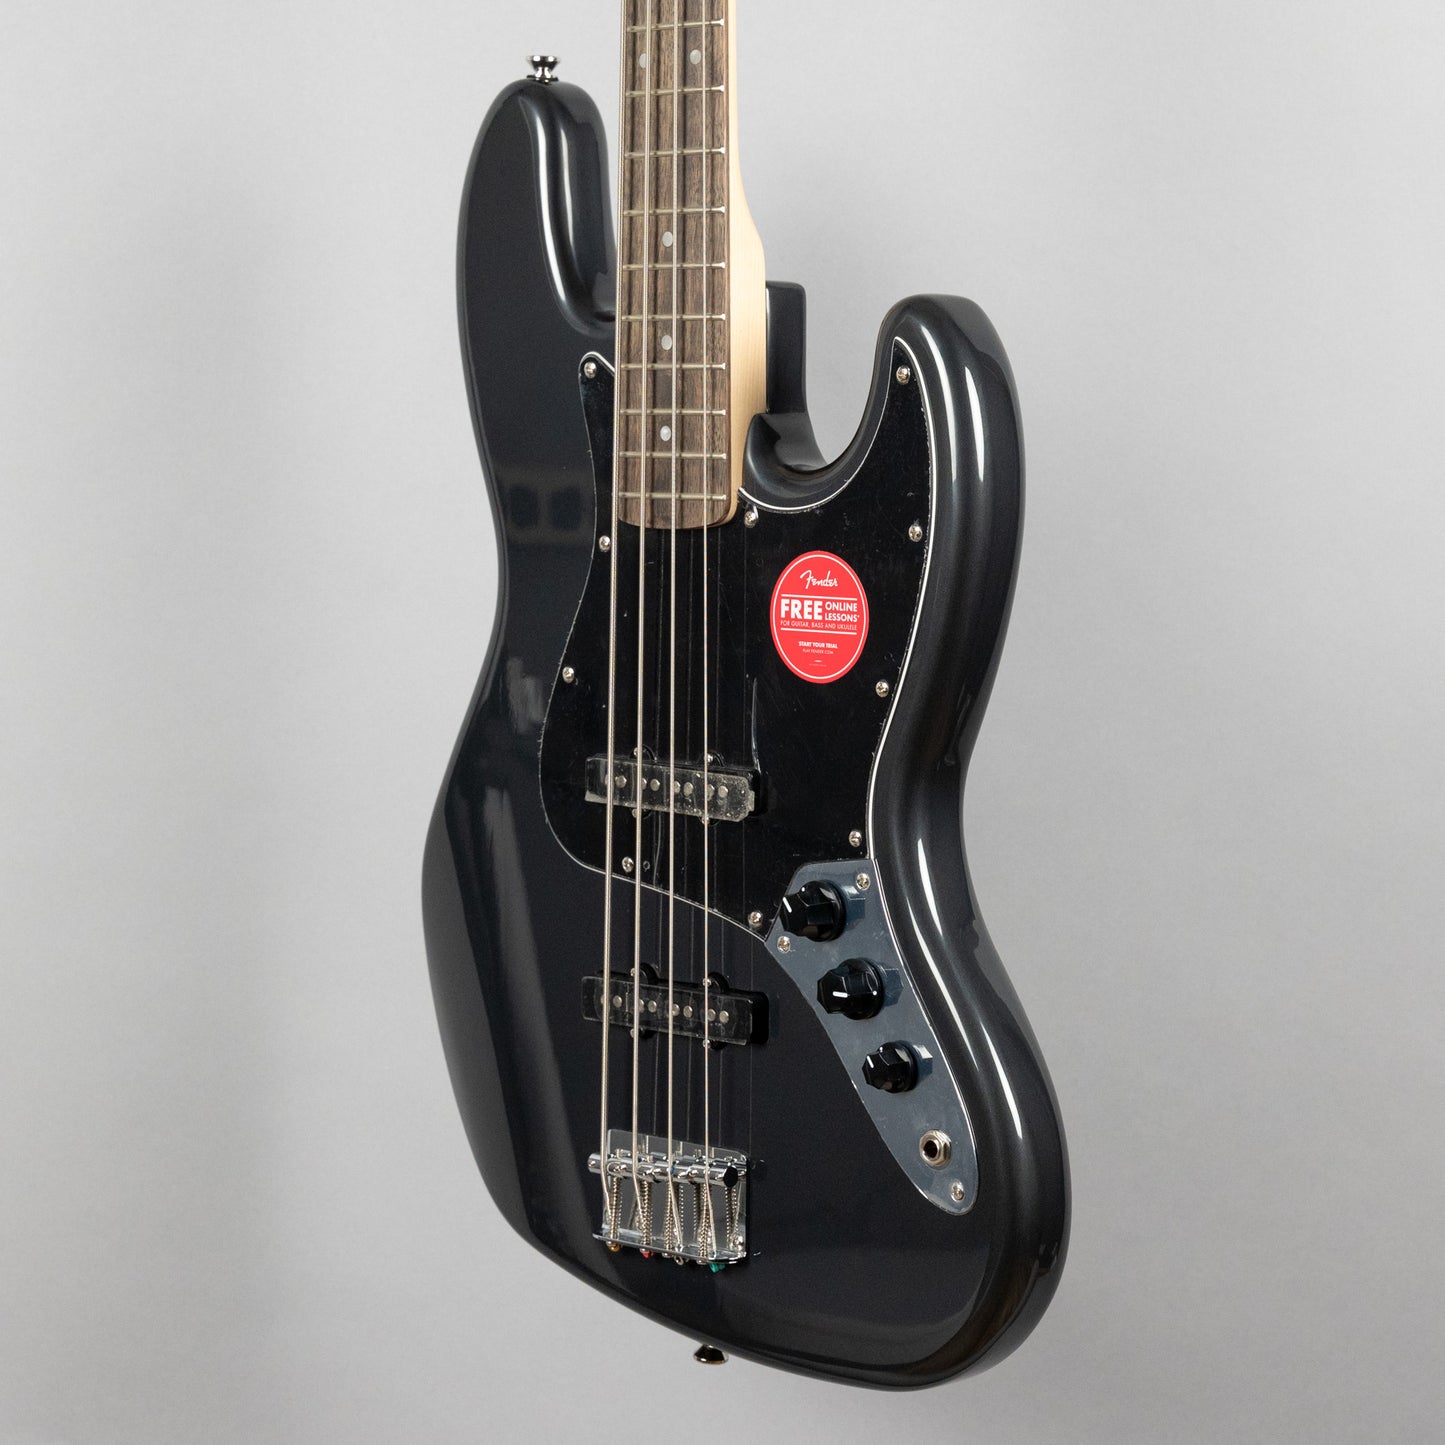 Squier Affinity Series Jazz Bass in Charcoal Frost Metallic